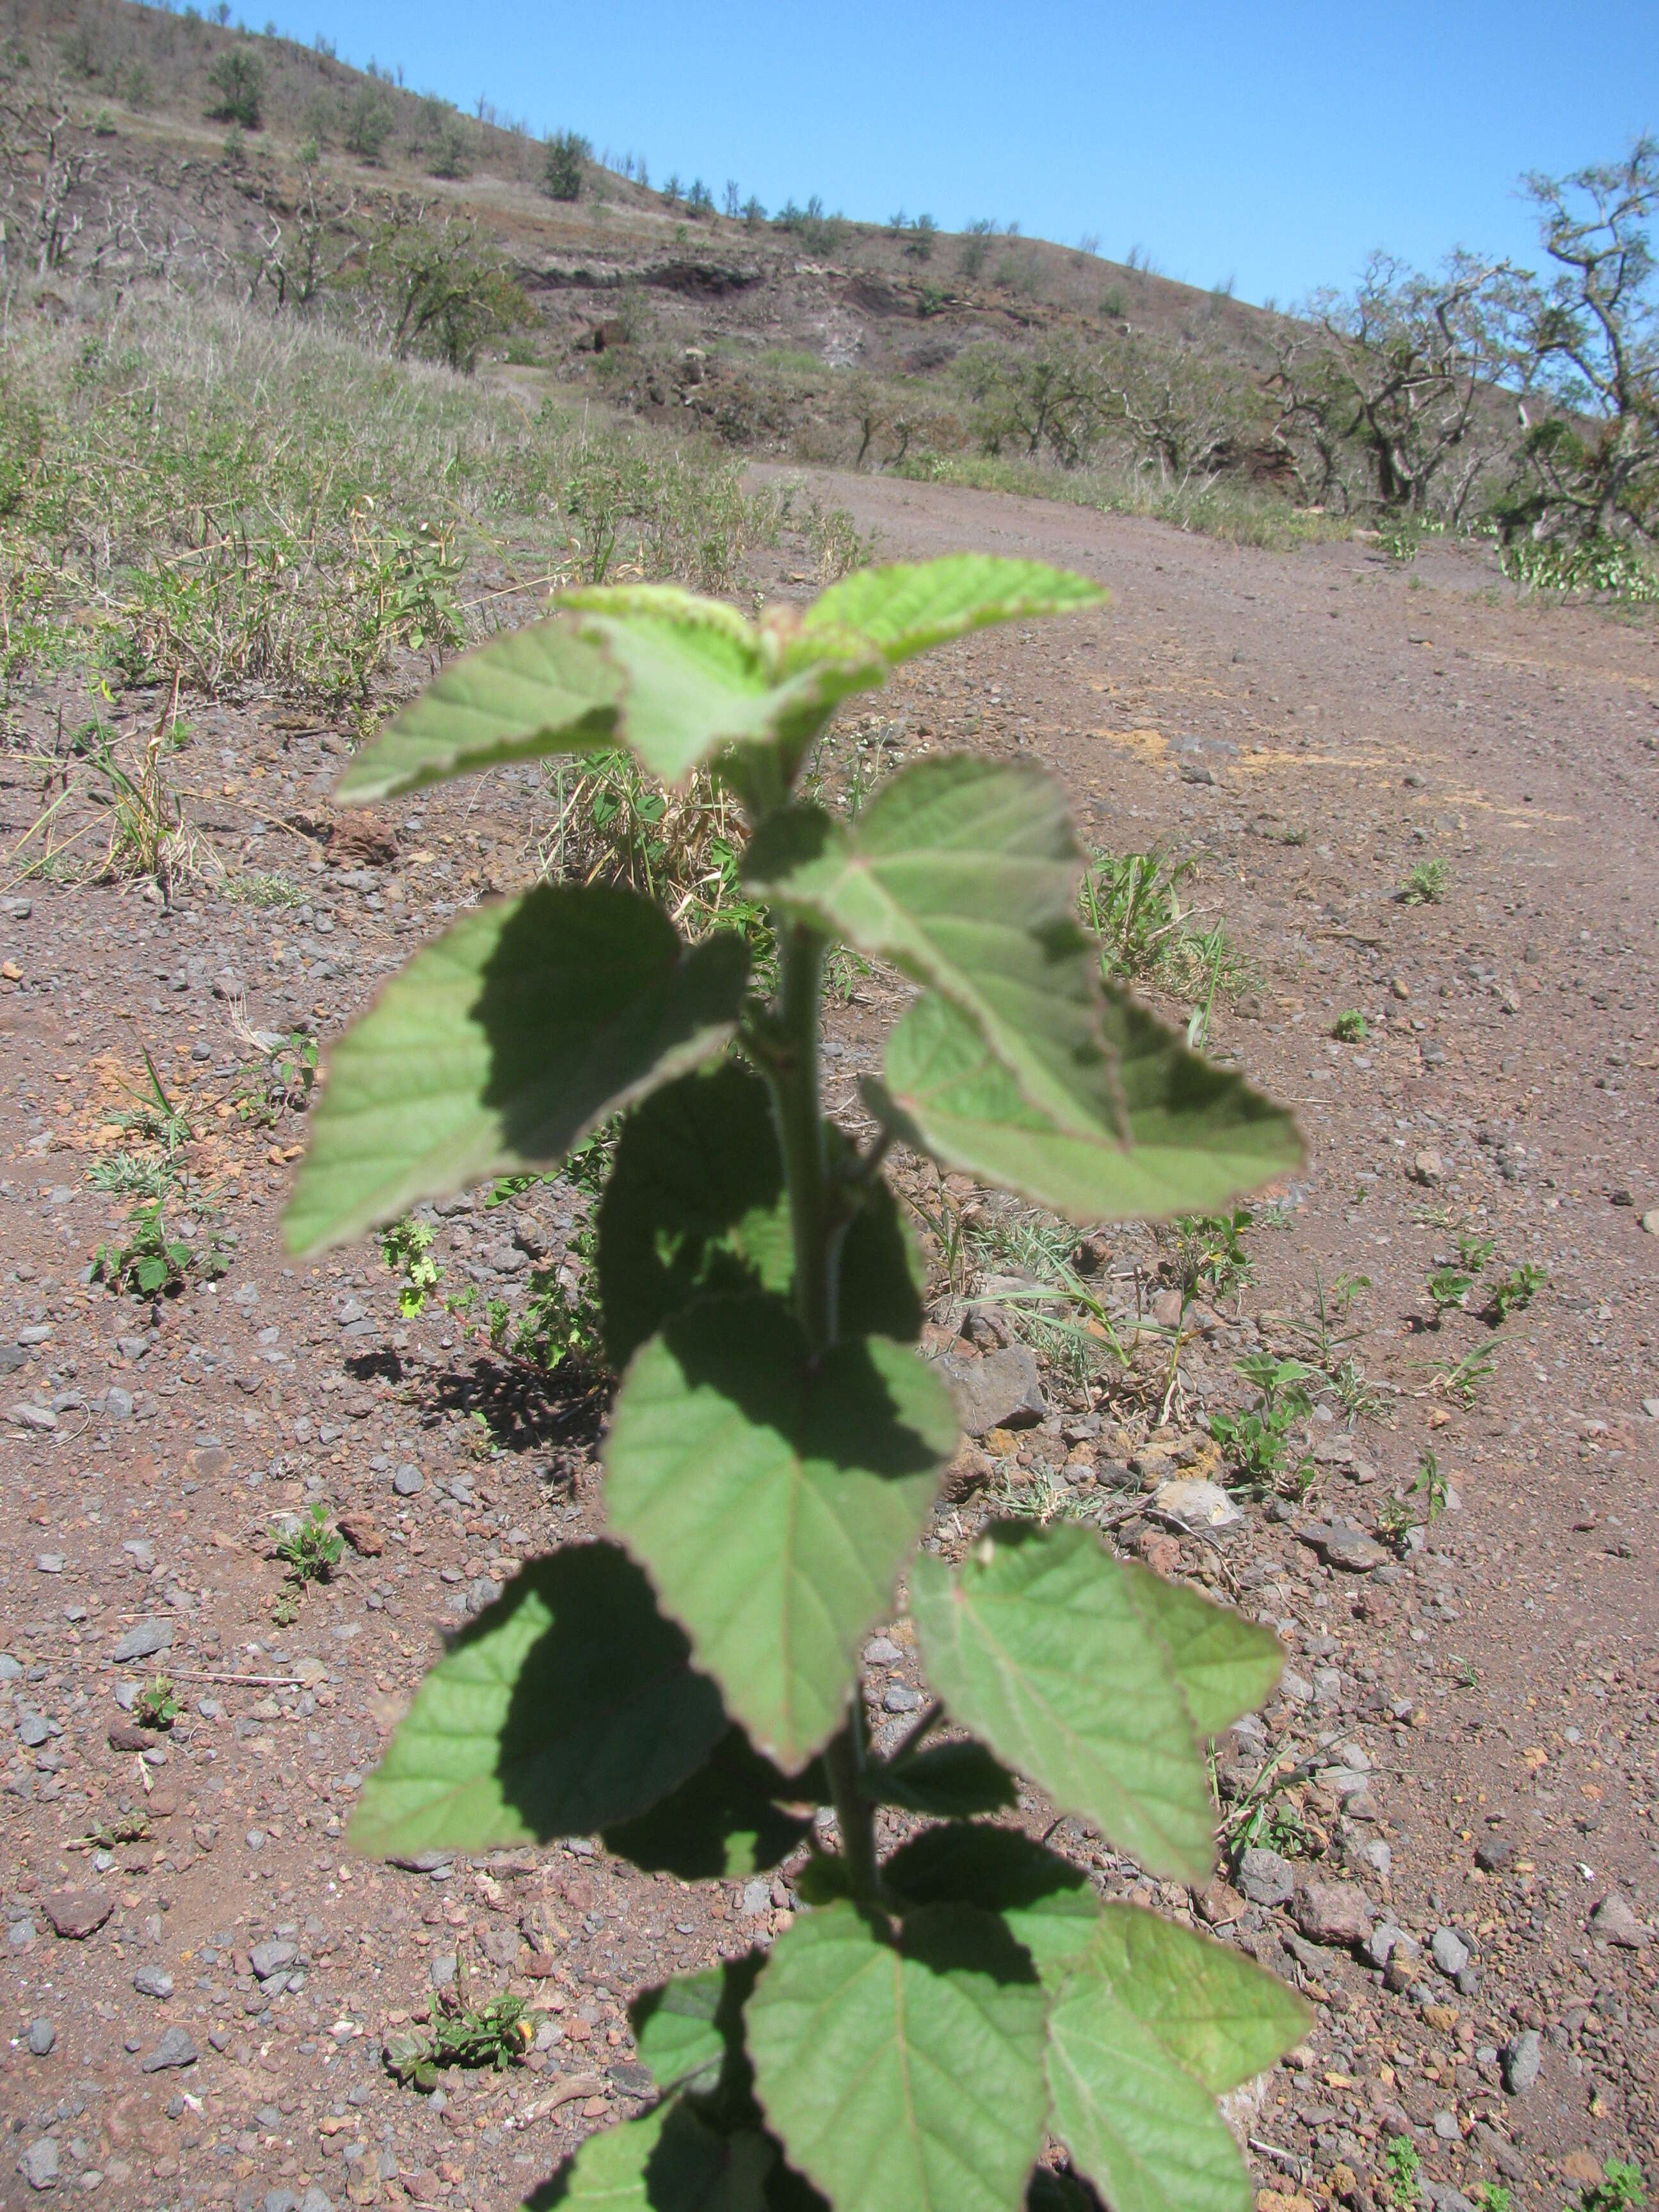 Image of country mallow